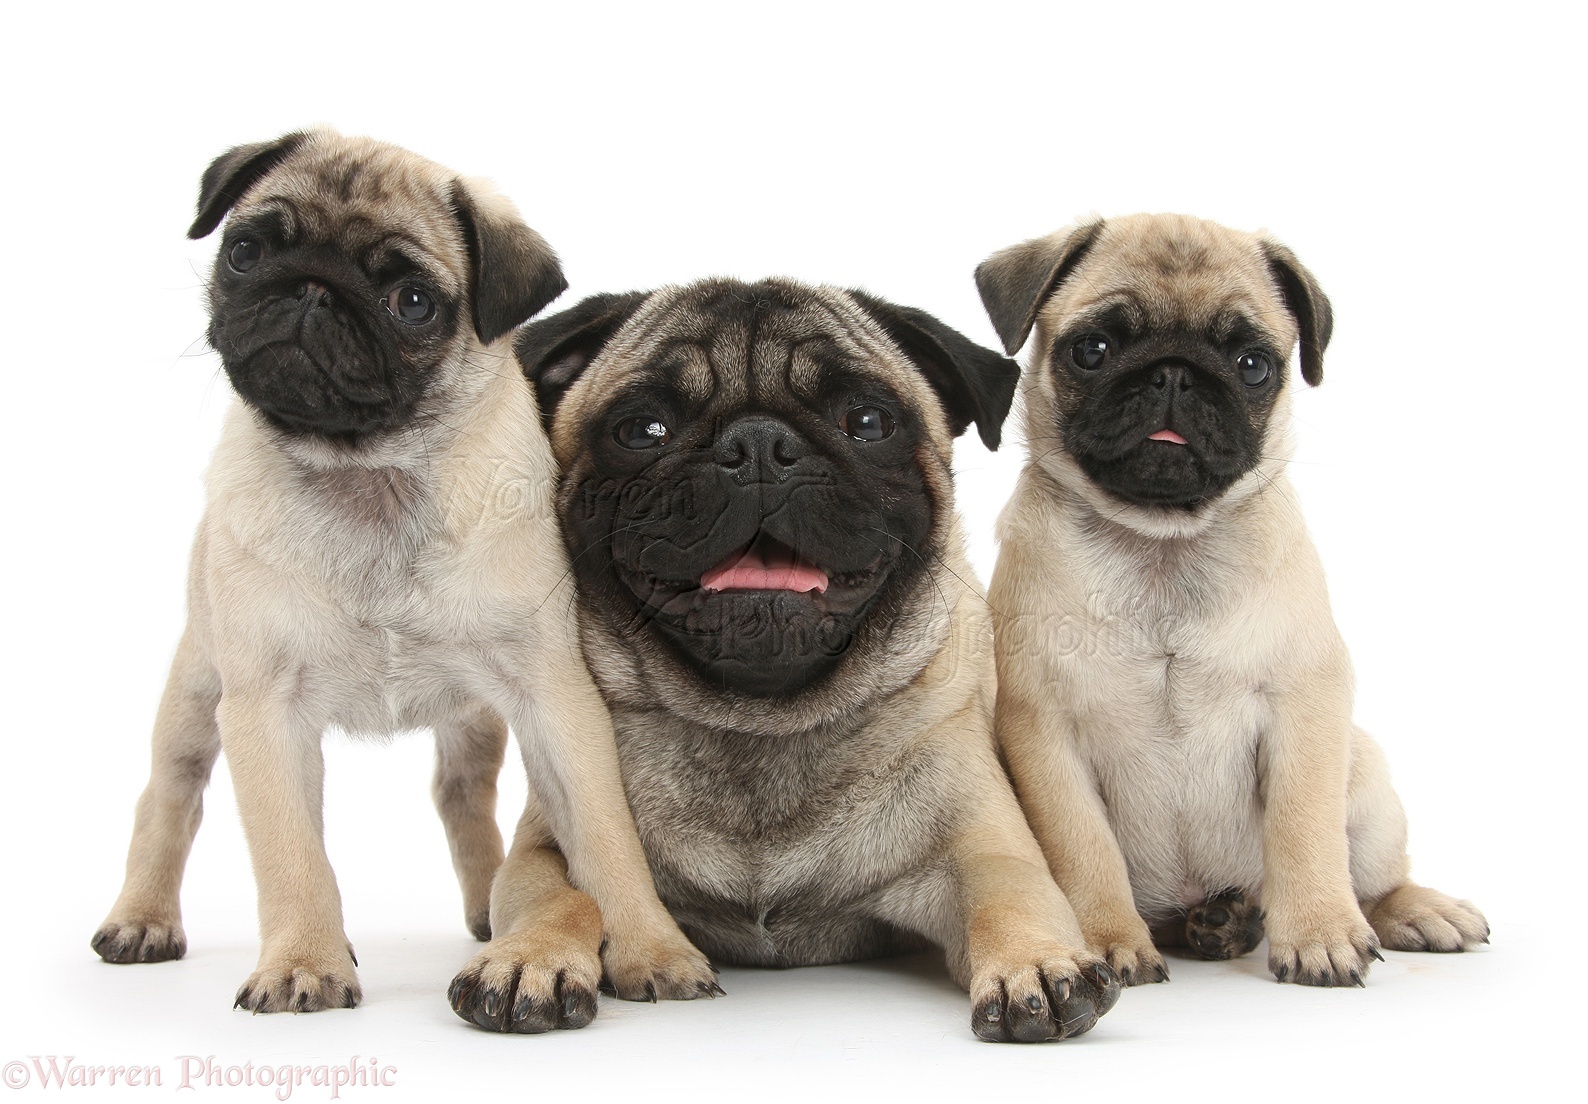 Fawn Pug dog and puppies, 8 weeks old photo WP29292